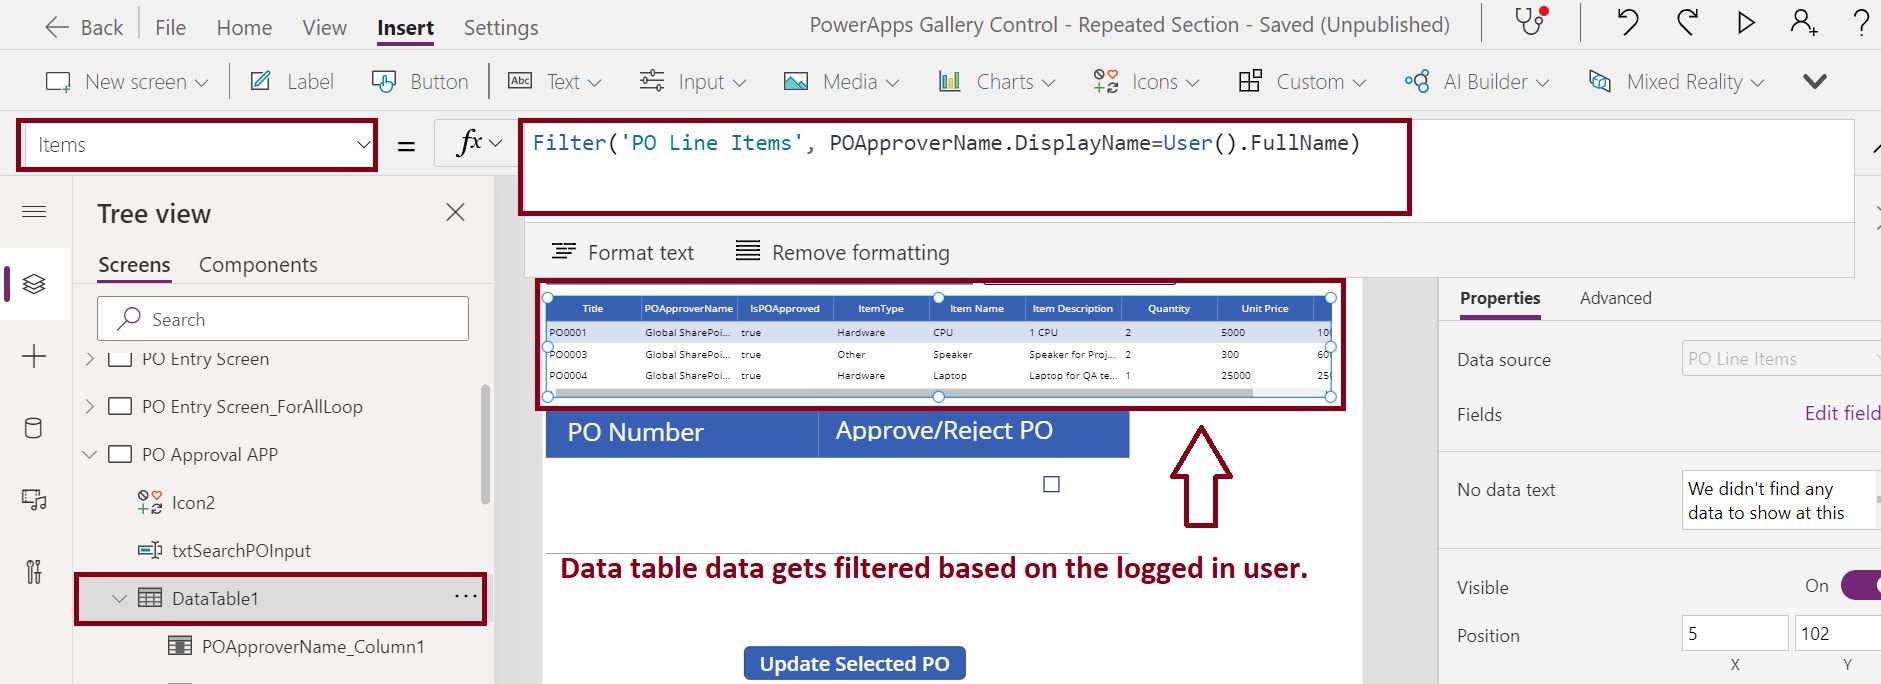 Filter PowerApps data table items based on the logged in user